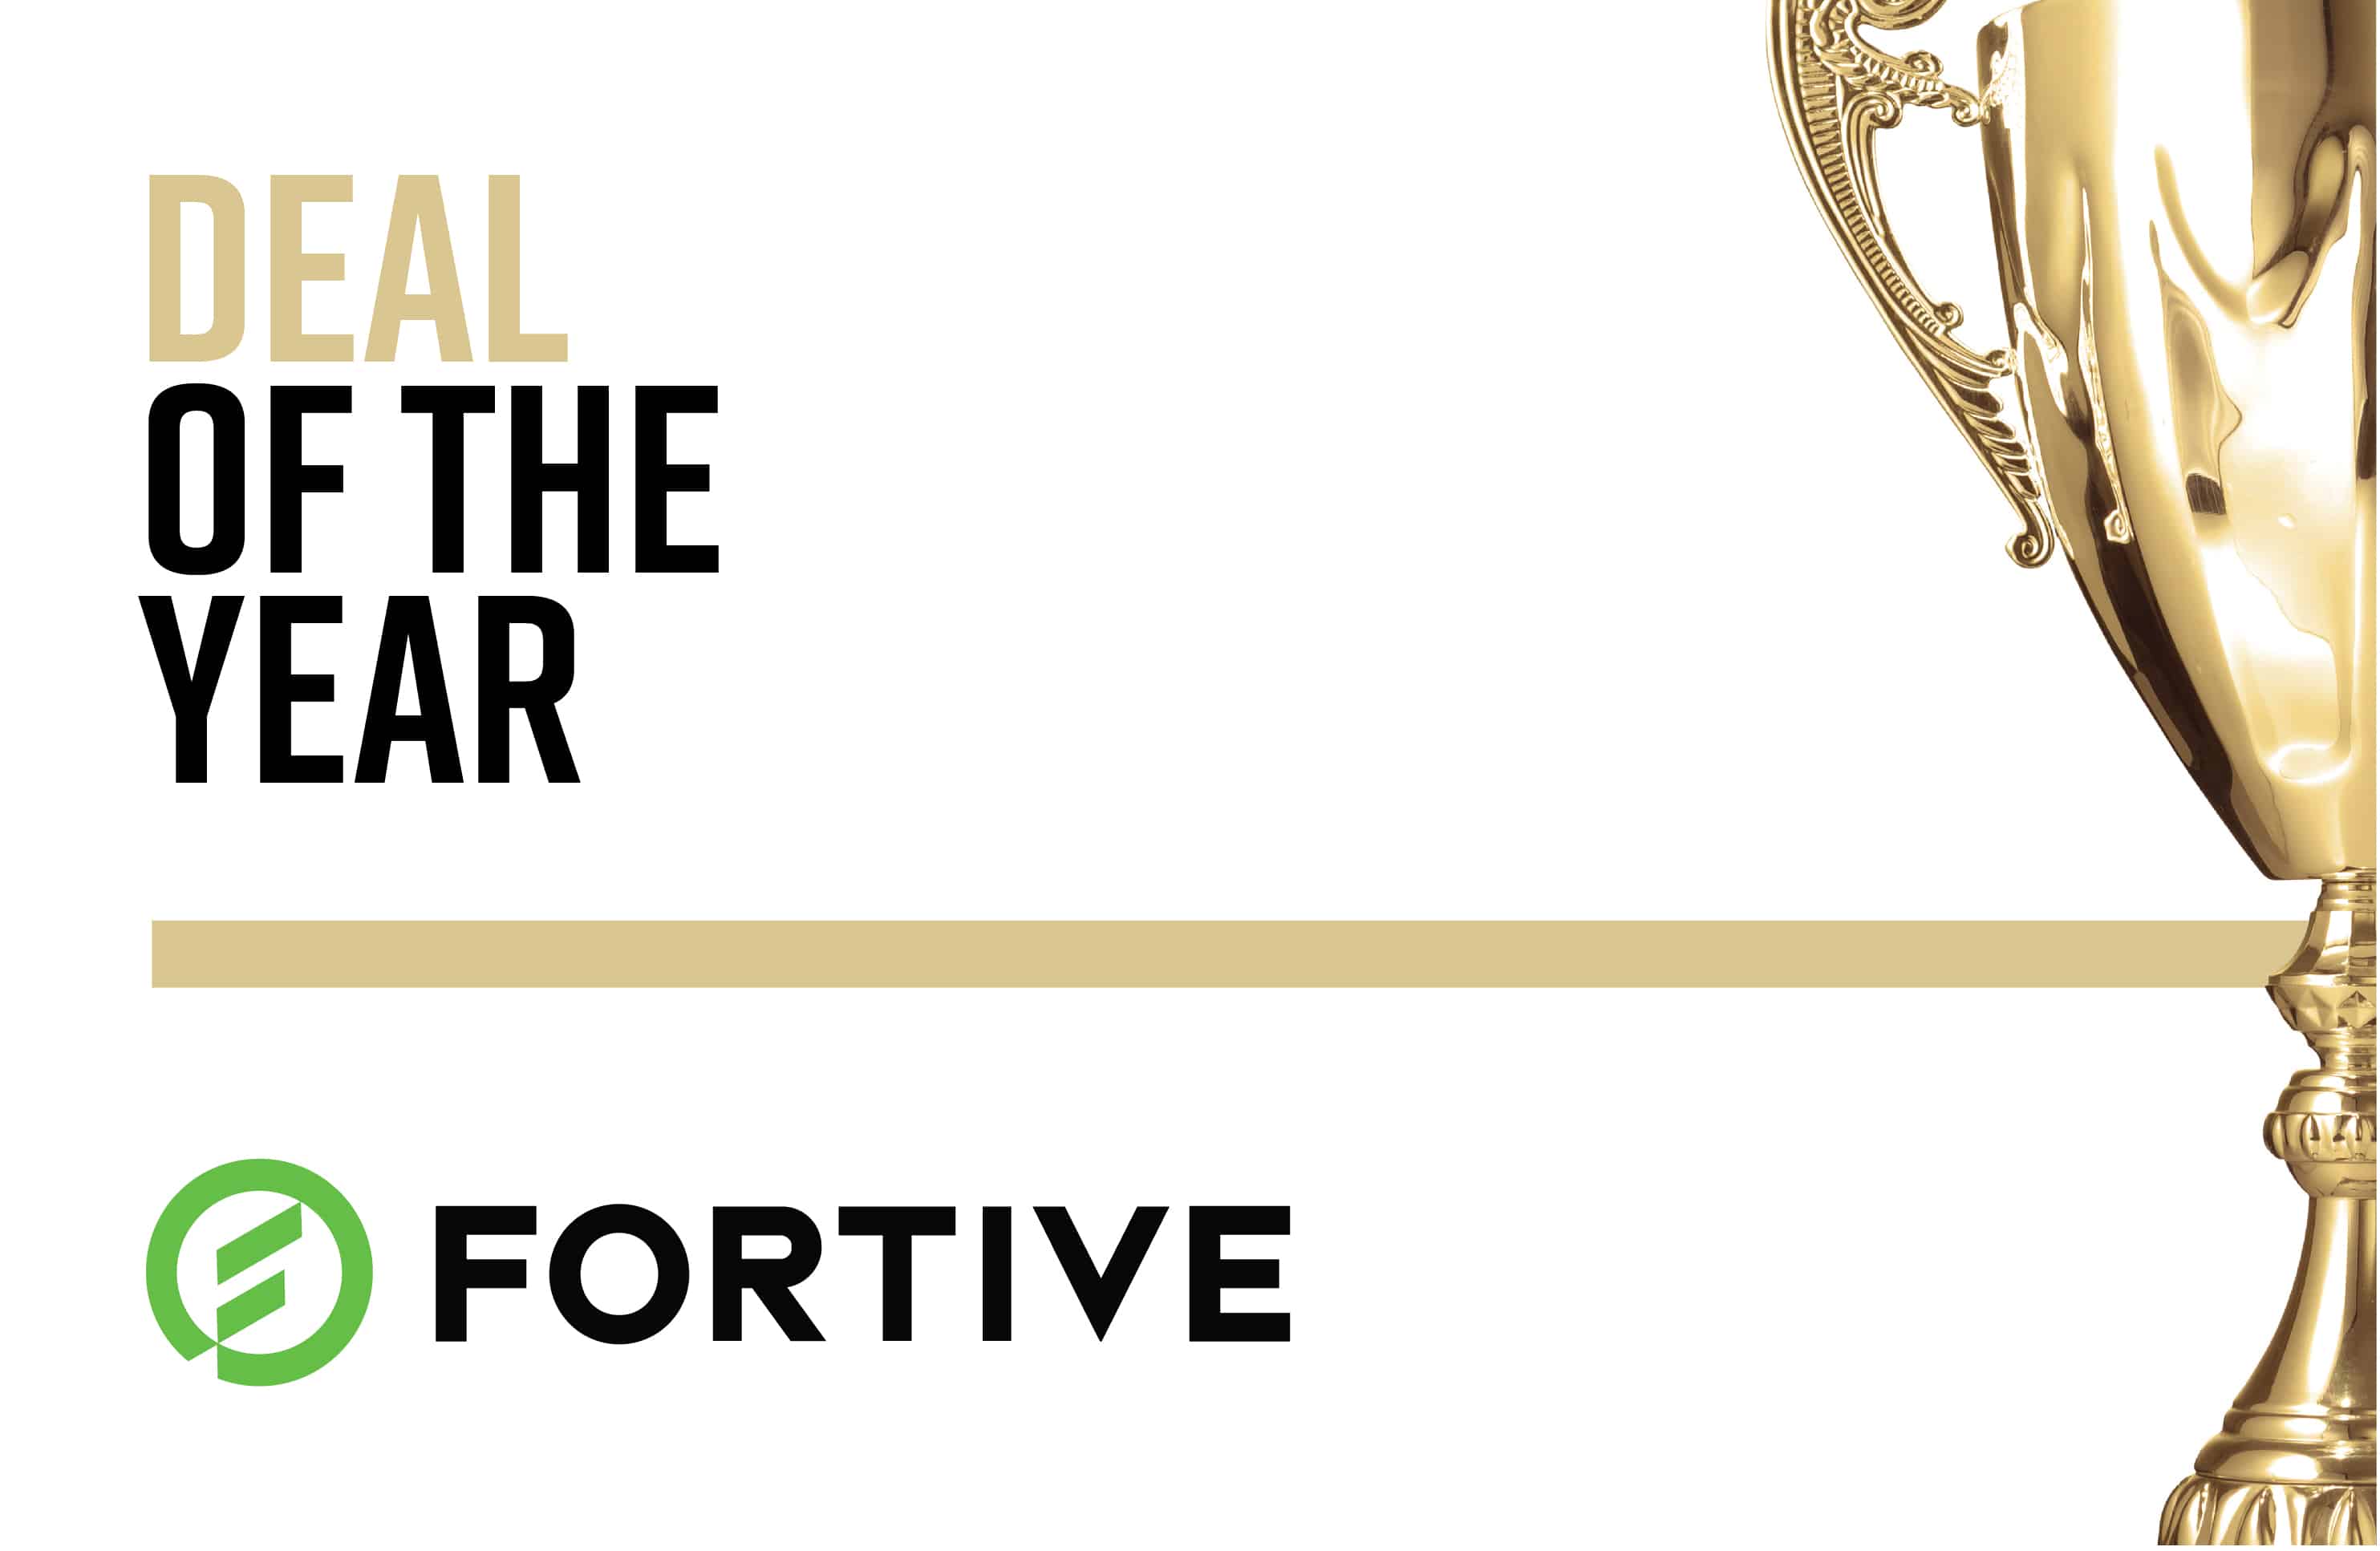 Deal of the Year: Fortive (for purchase of Gordian)